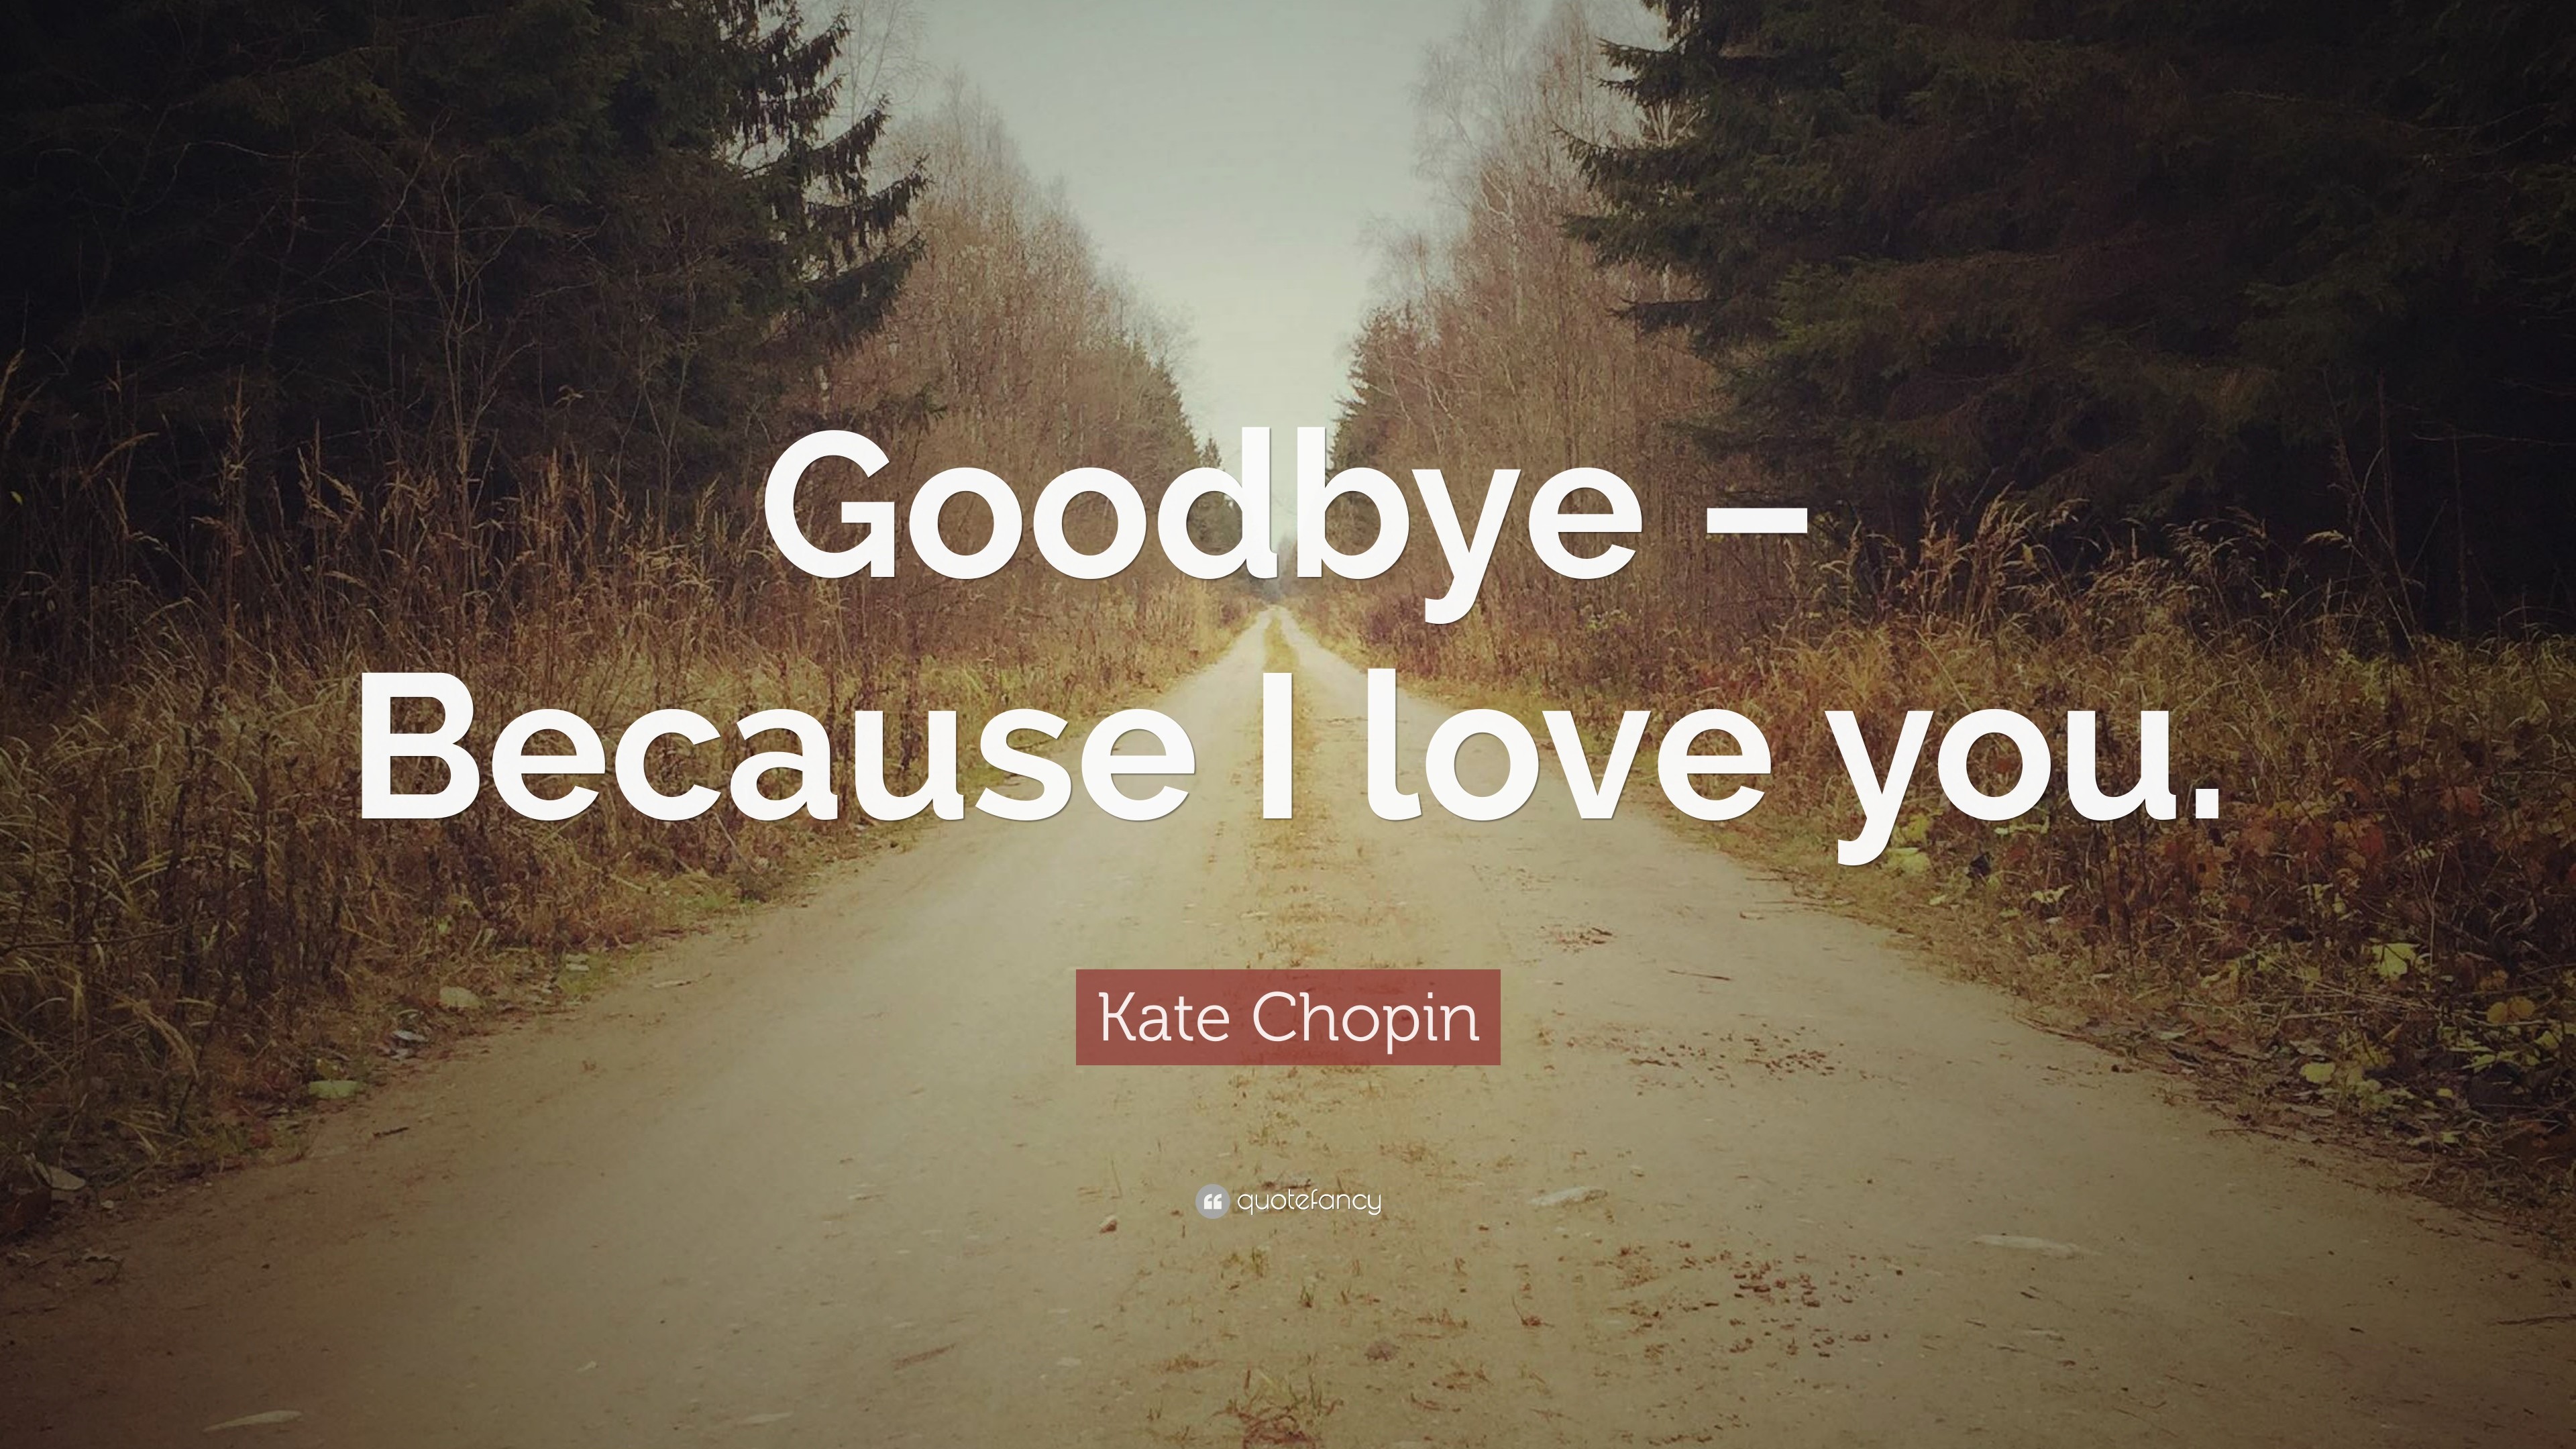 3840x2160 Goodbye Quotes: “Goodbye – Because I love you.” — Kate Chopin